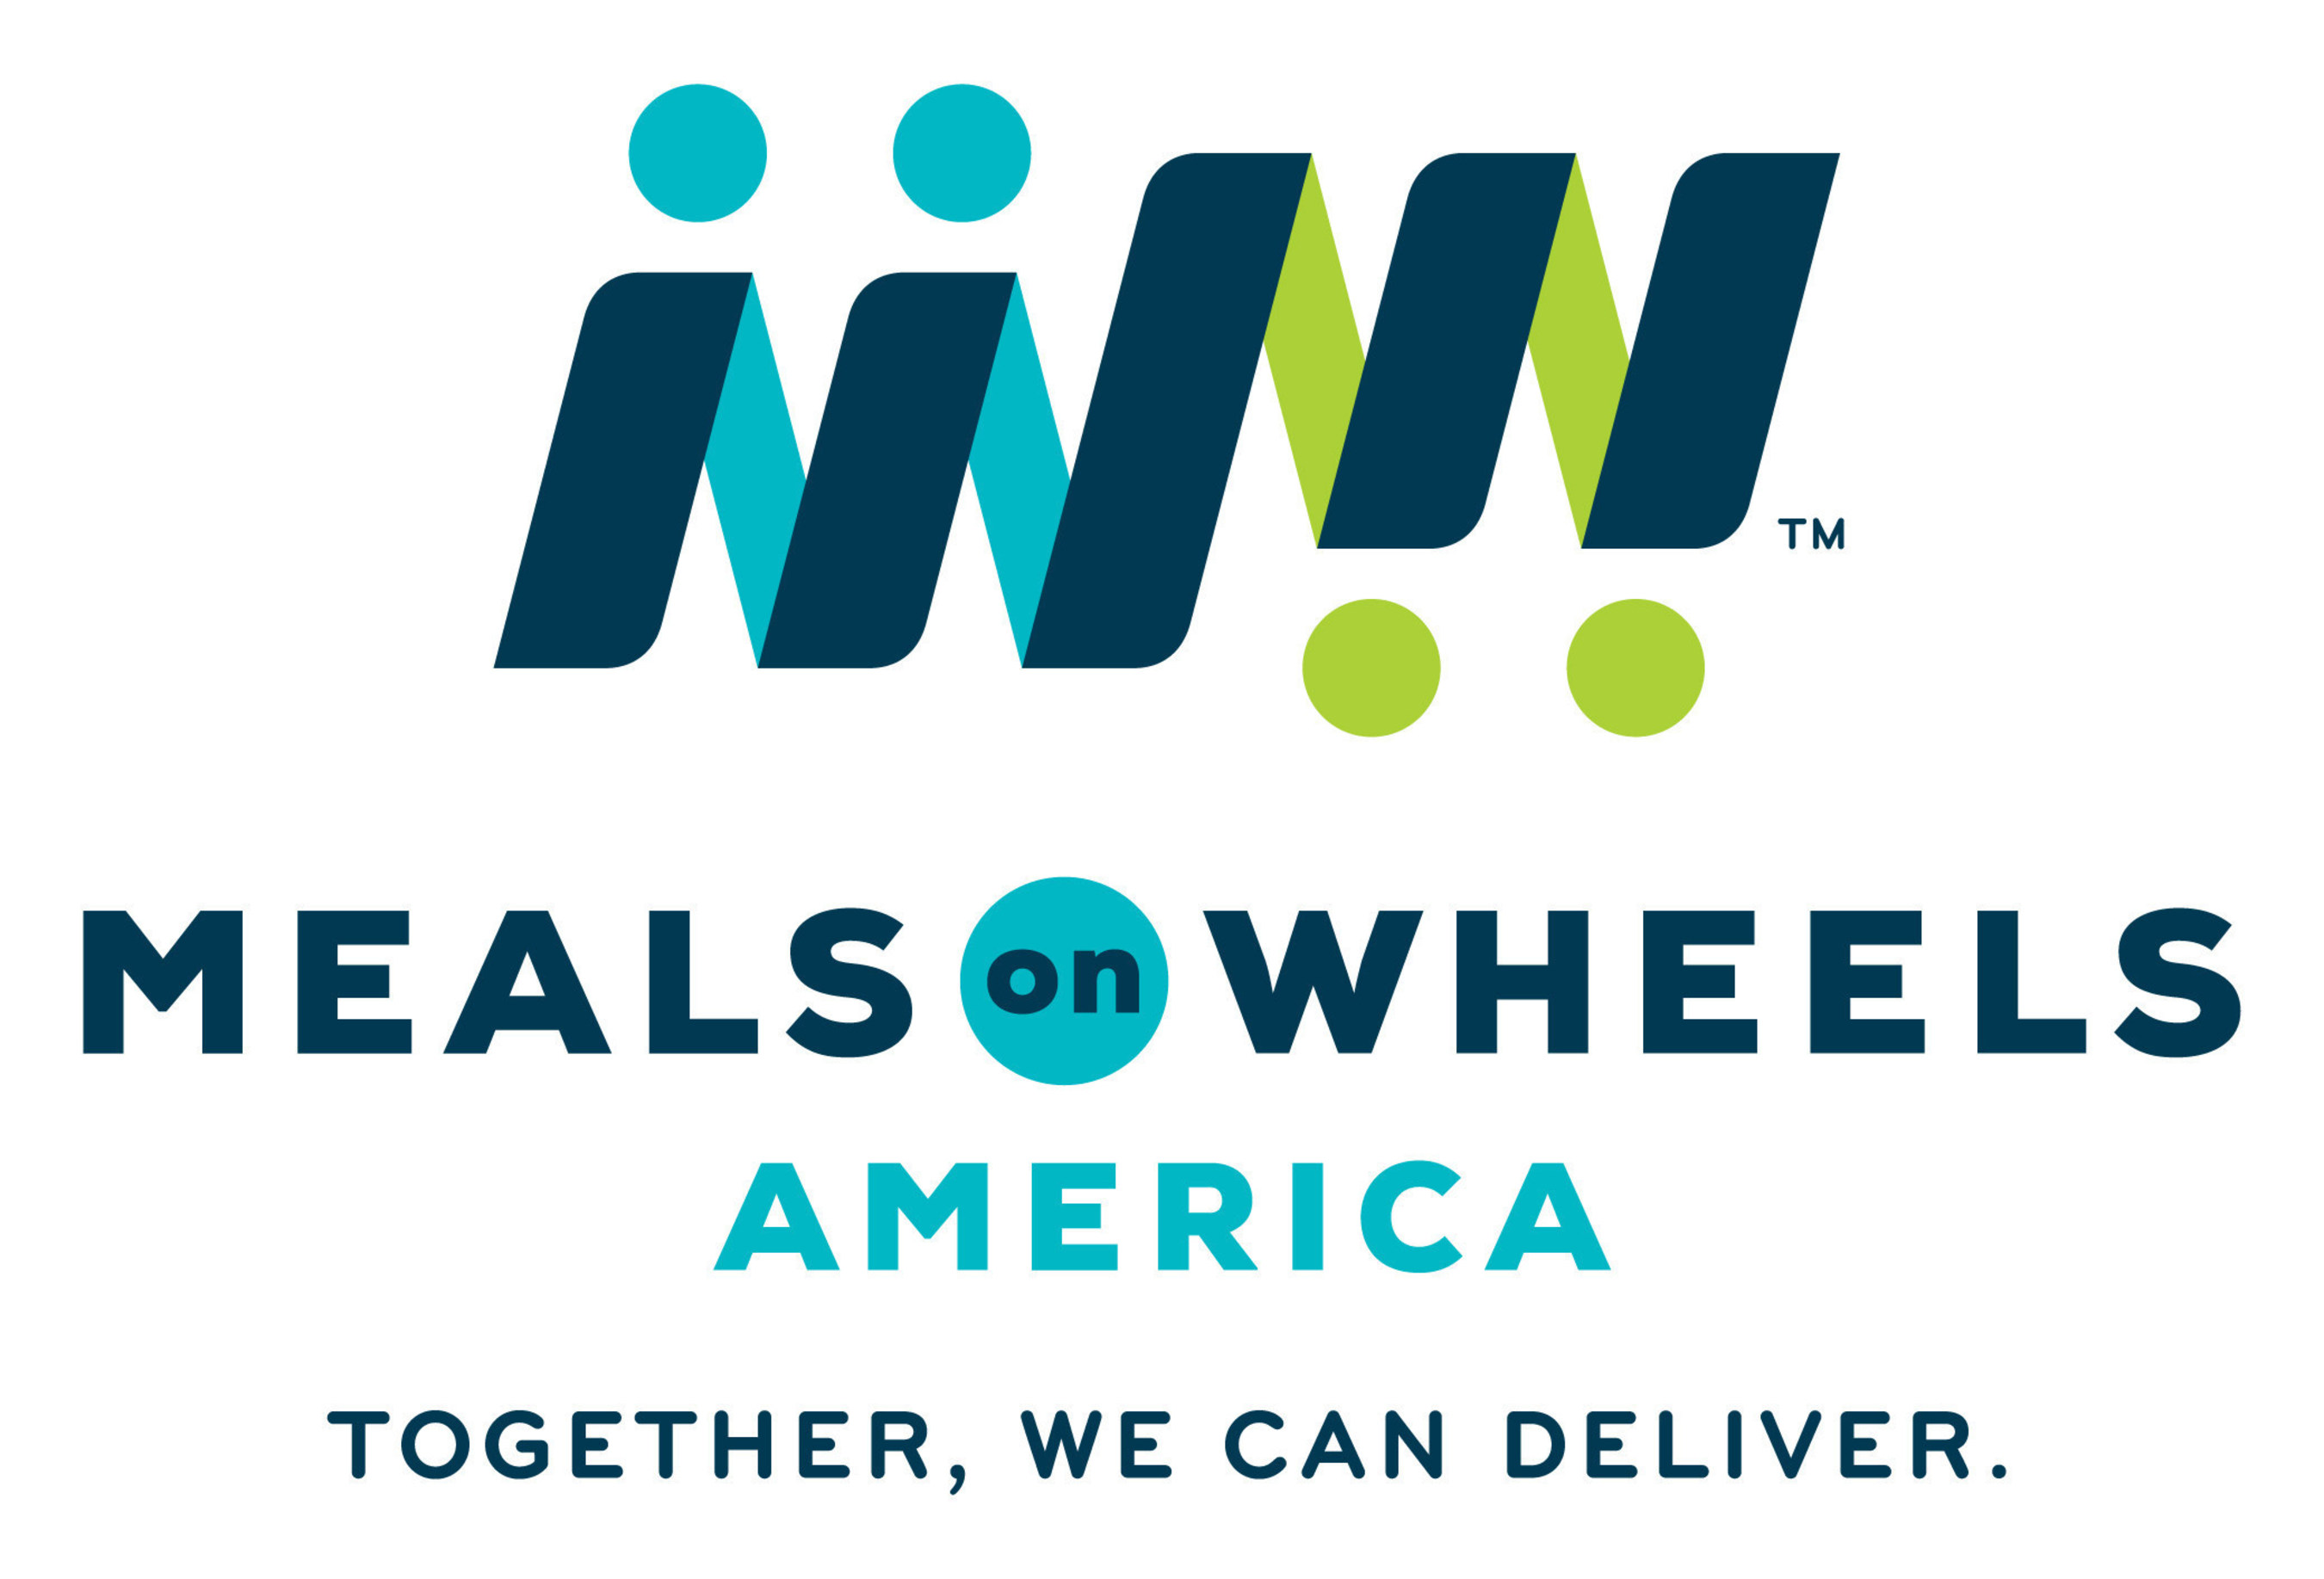 Meals on Wheels operates in virtually every community in America to address senior hunger and isolation.